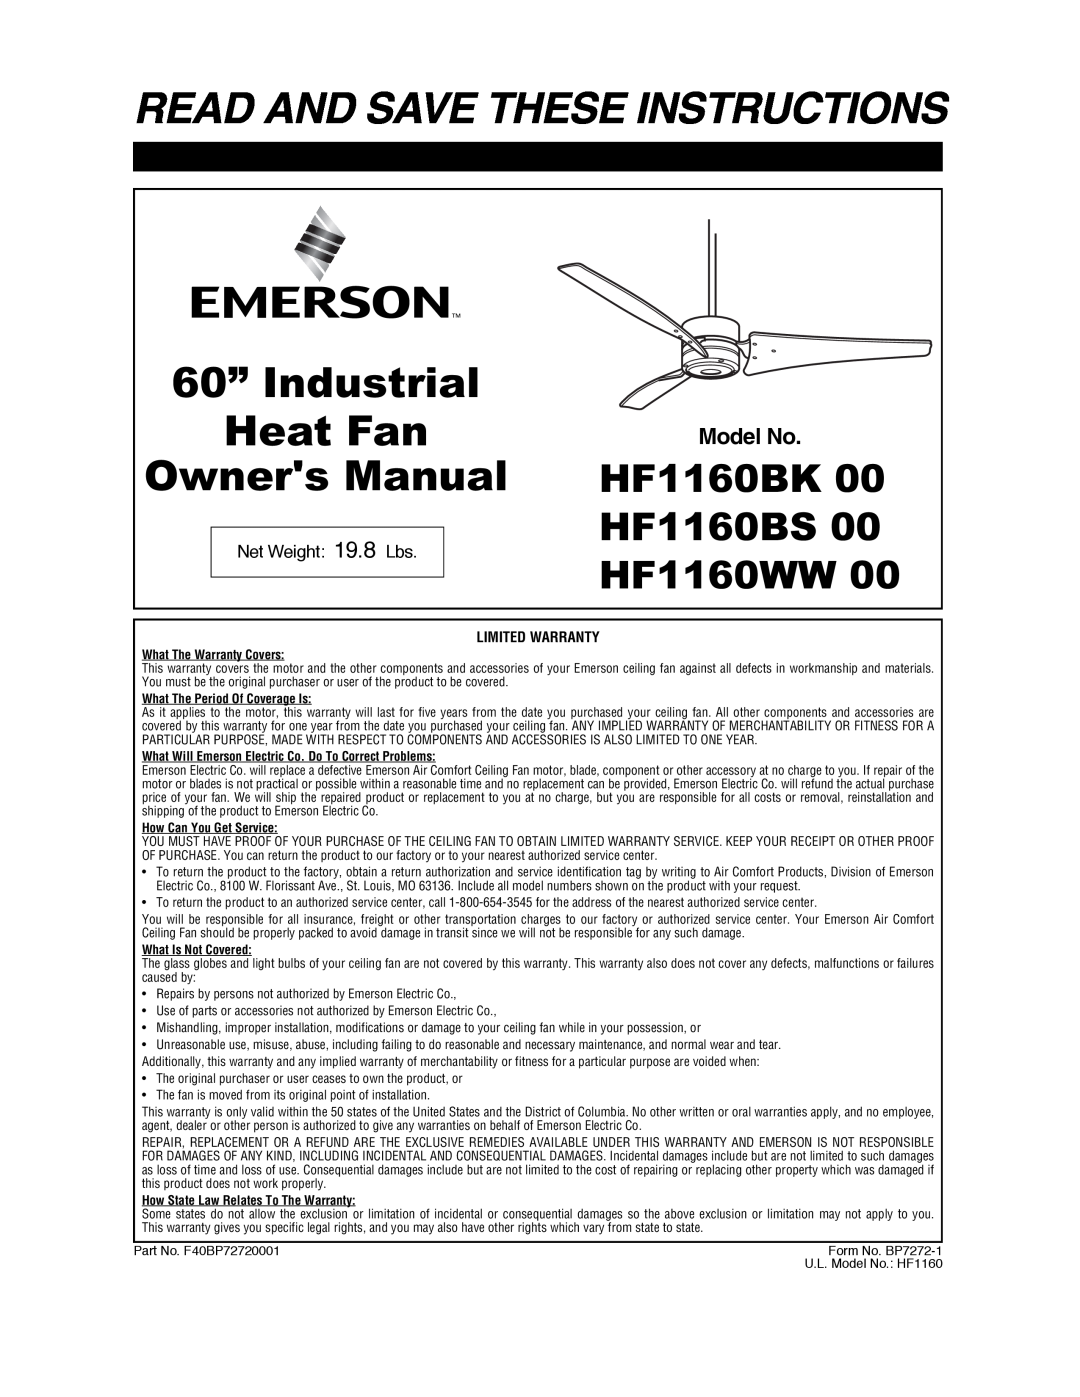 Emerson HF1160WW 00 warranty Read And Save These Instructions, 60” Industrial, Heat Fan, HF1160BK, HF1160BS, Model No 